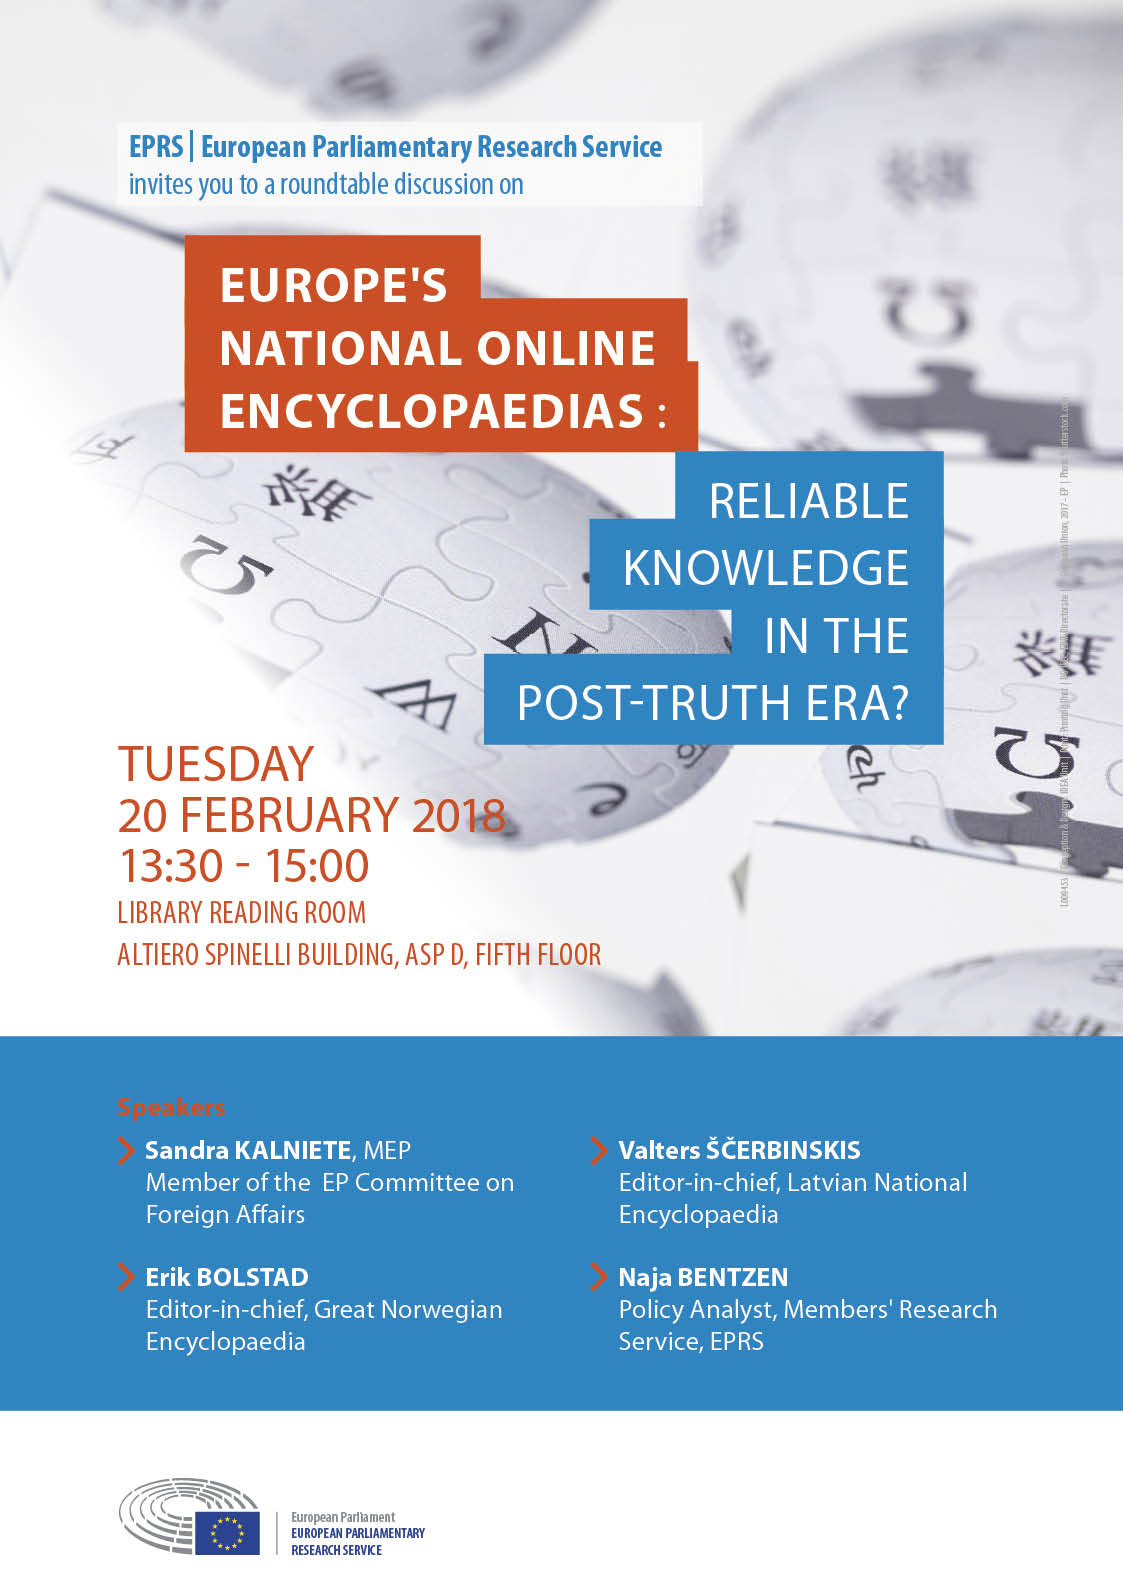 Europe’s online encyclopaedias: Reliable knowledge for all in the post-fact era?